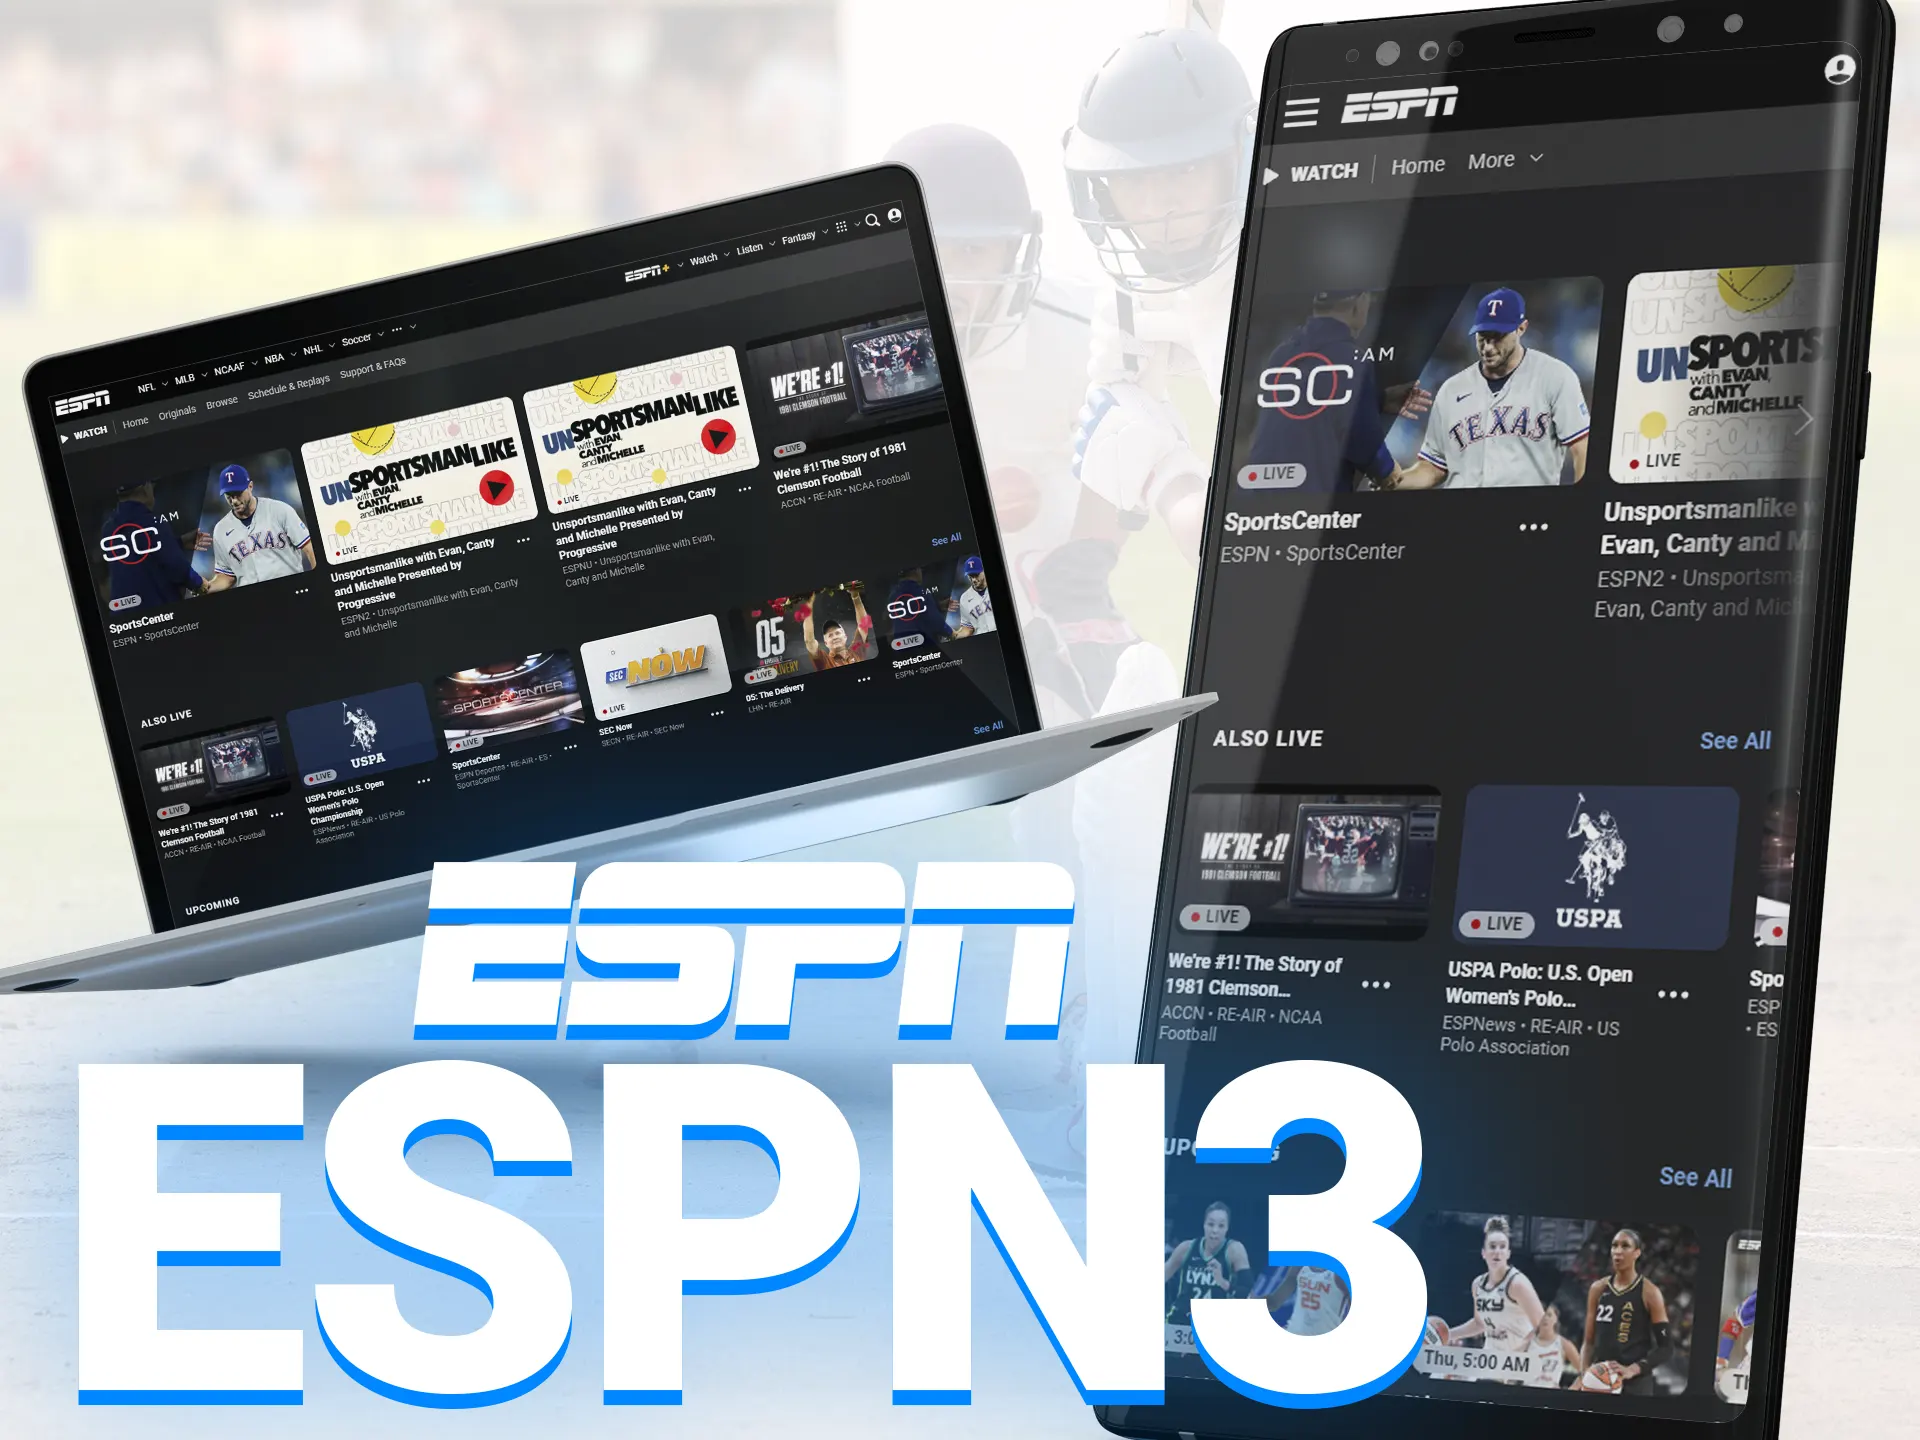 ESPN3 is currently available at no additional cost to those with a high-speed Internet connection.